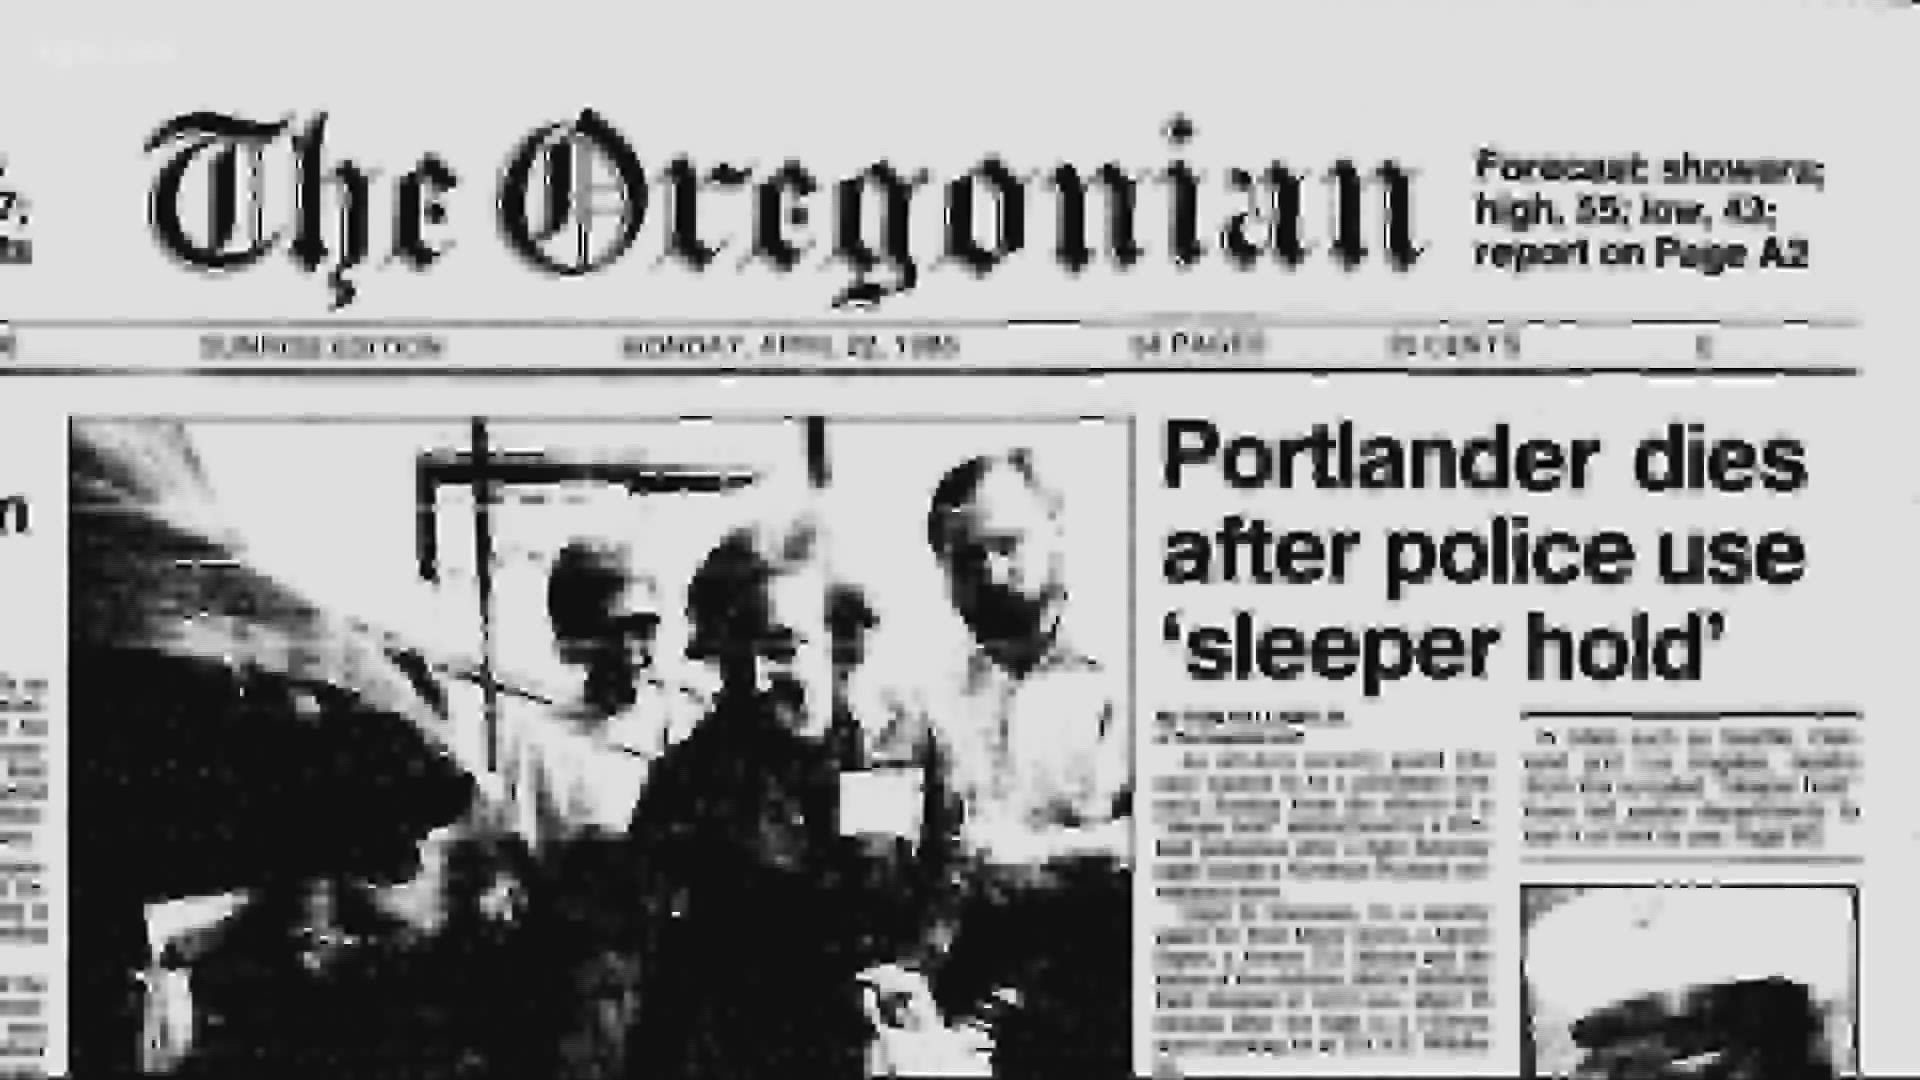 Stevenson, a black man, was killed in Portland police custody in 1985. Like today, his death led to protests and extreme outrage.